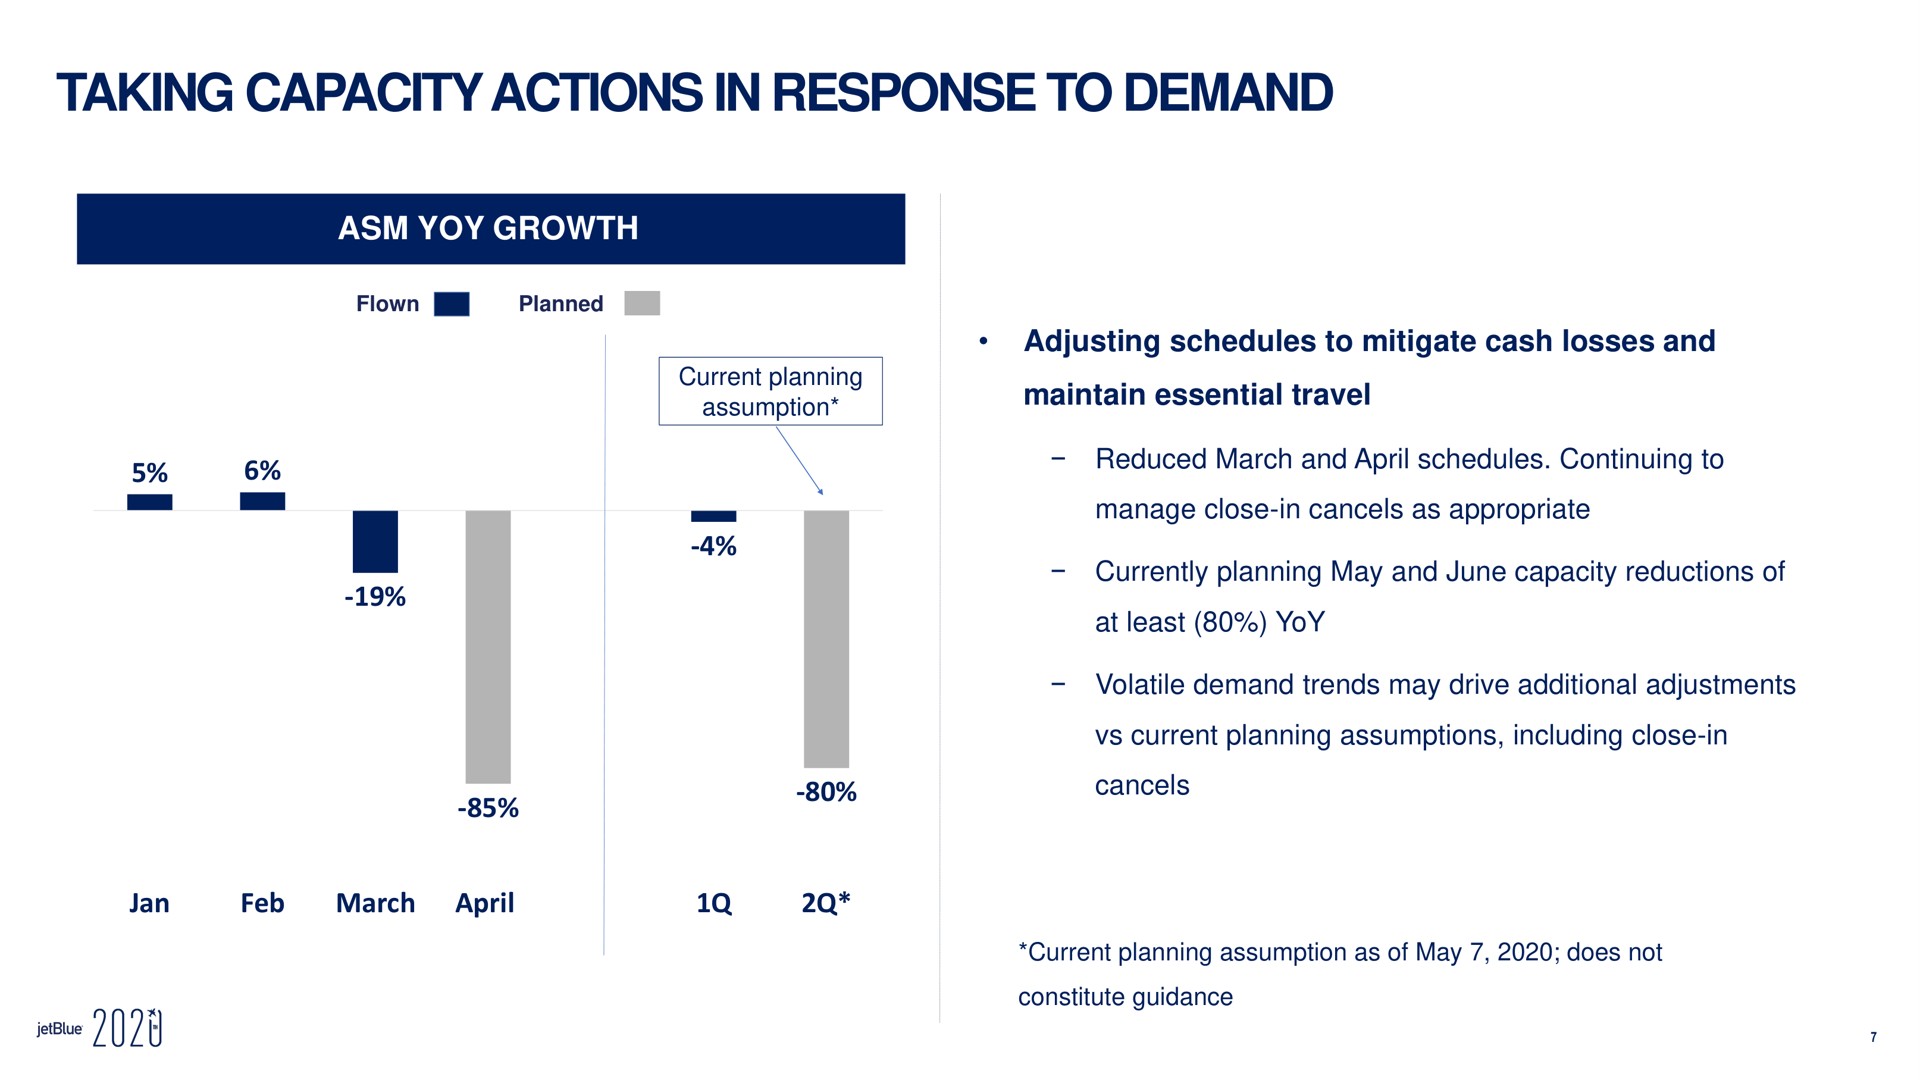 taking capacity actions in response to demand yoy growth adjusting schedules to mitigate cash losses and maintain essential travel reduced march and schedules continuing to manage close in cancels as appropriate currently planning may and june capacity reductions of at least yoy volatile demand trends may drive additional adjustments current planning assumptions including close in cancels march i a a woe | jetBlue